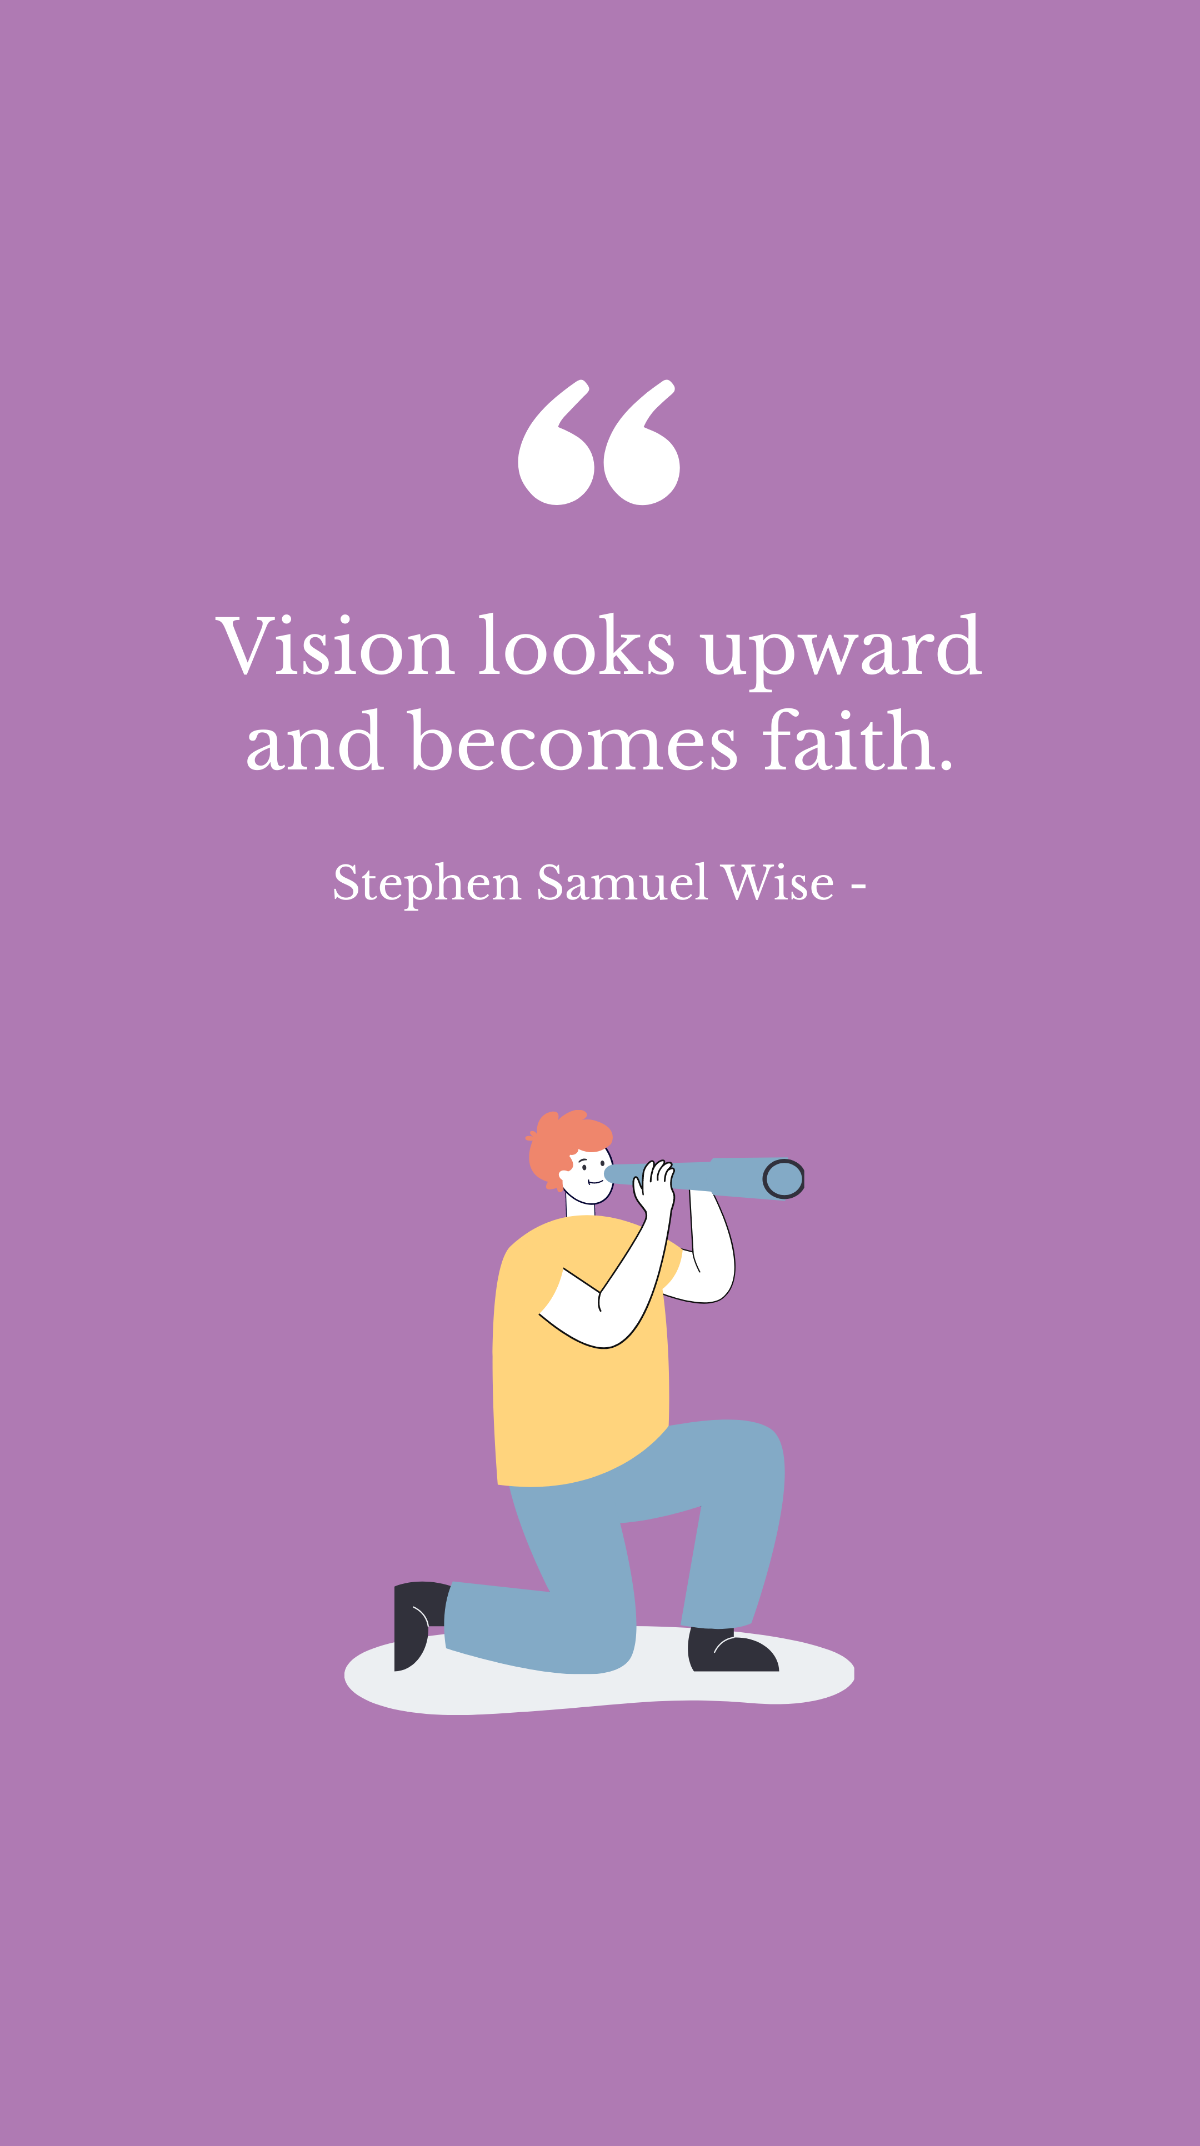 Free Stephen Samuel Wise - Vision looks upward and becomes faith. Template